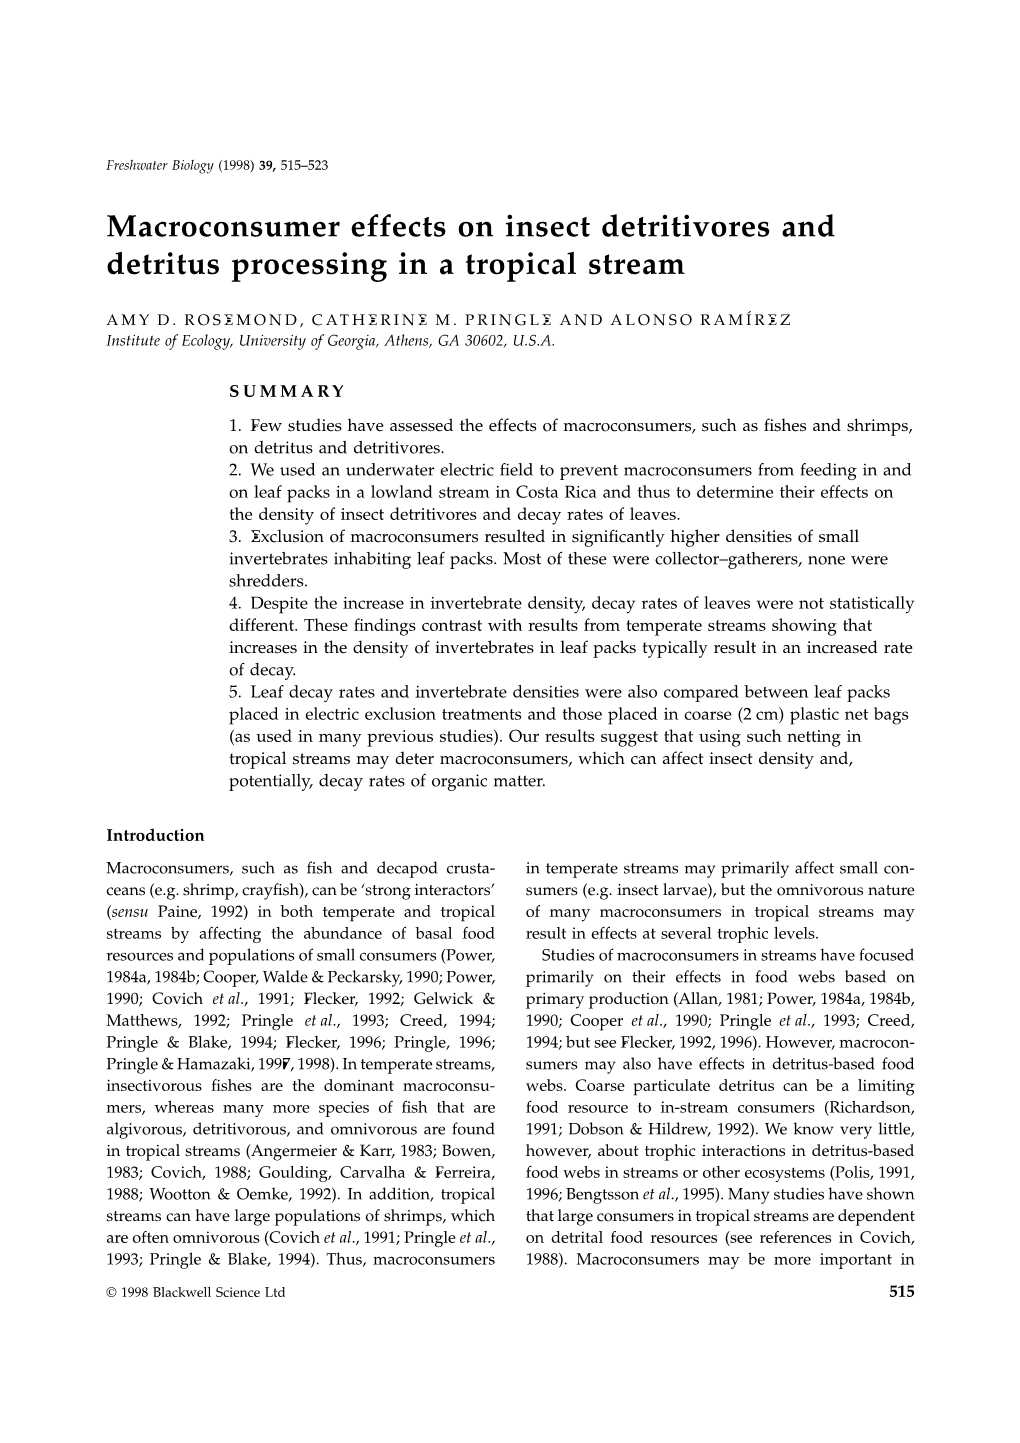 Macroconsumer Effects on Insect Detritivores and Detritus Processing in a Tropical Stream